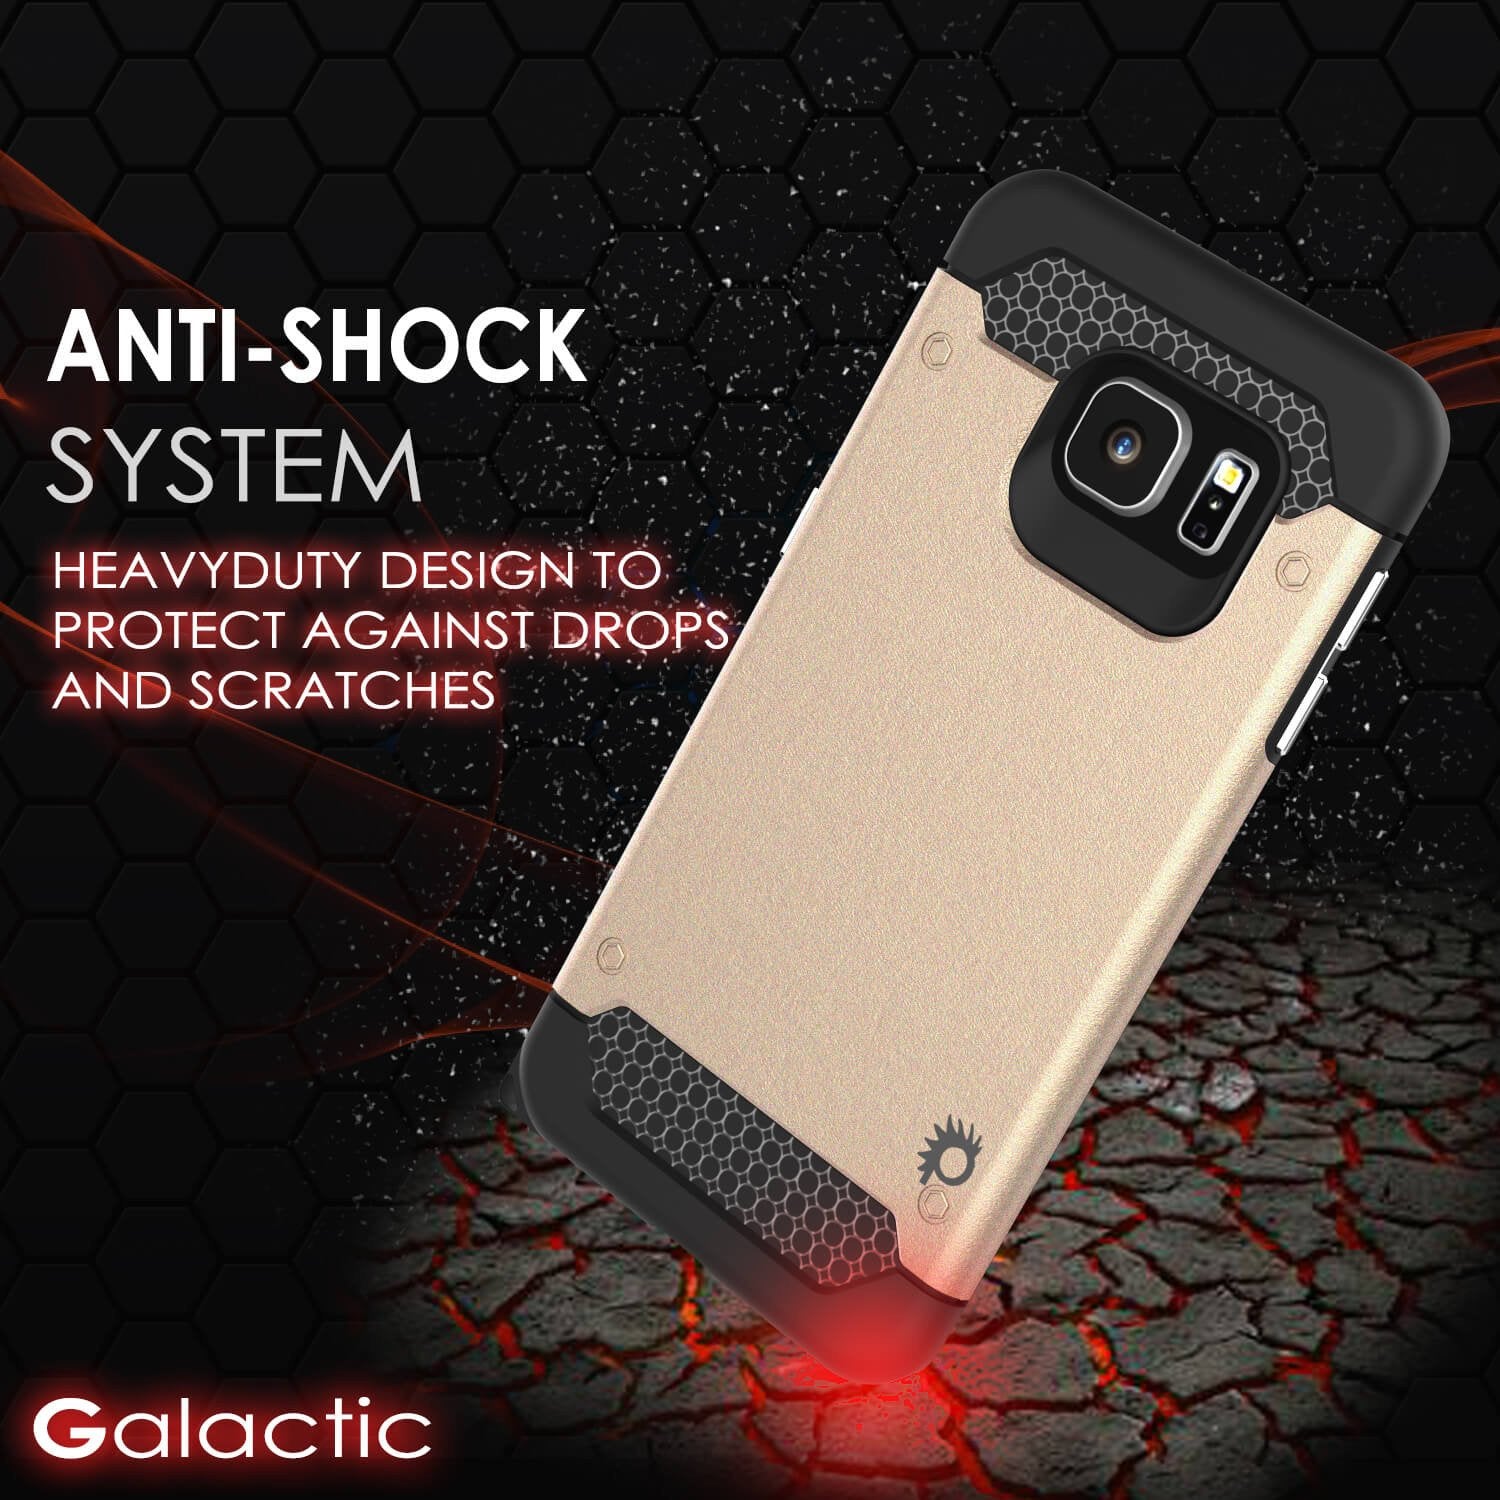 Galaxy s6 EDGE Case PunkCase Galactic Gold Series Slim Armor Soft Cover w/ Screen Protector